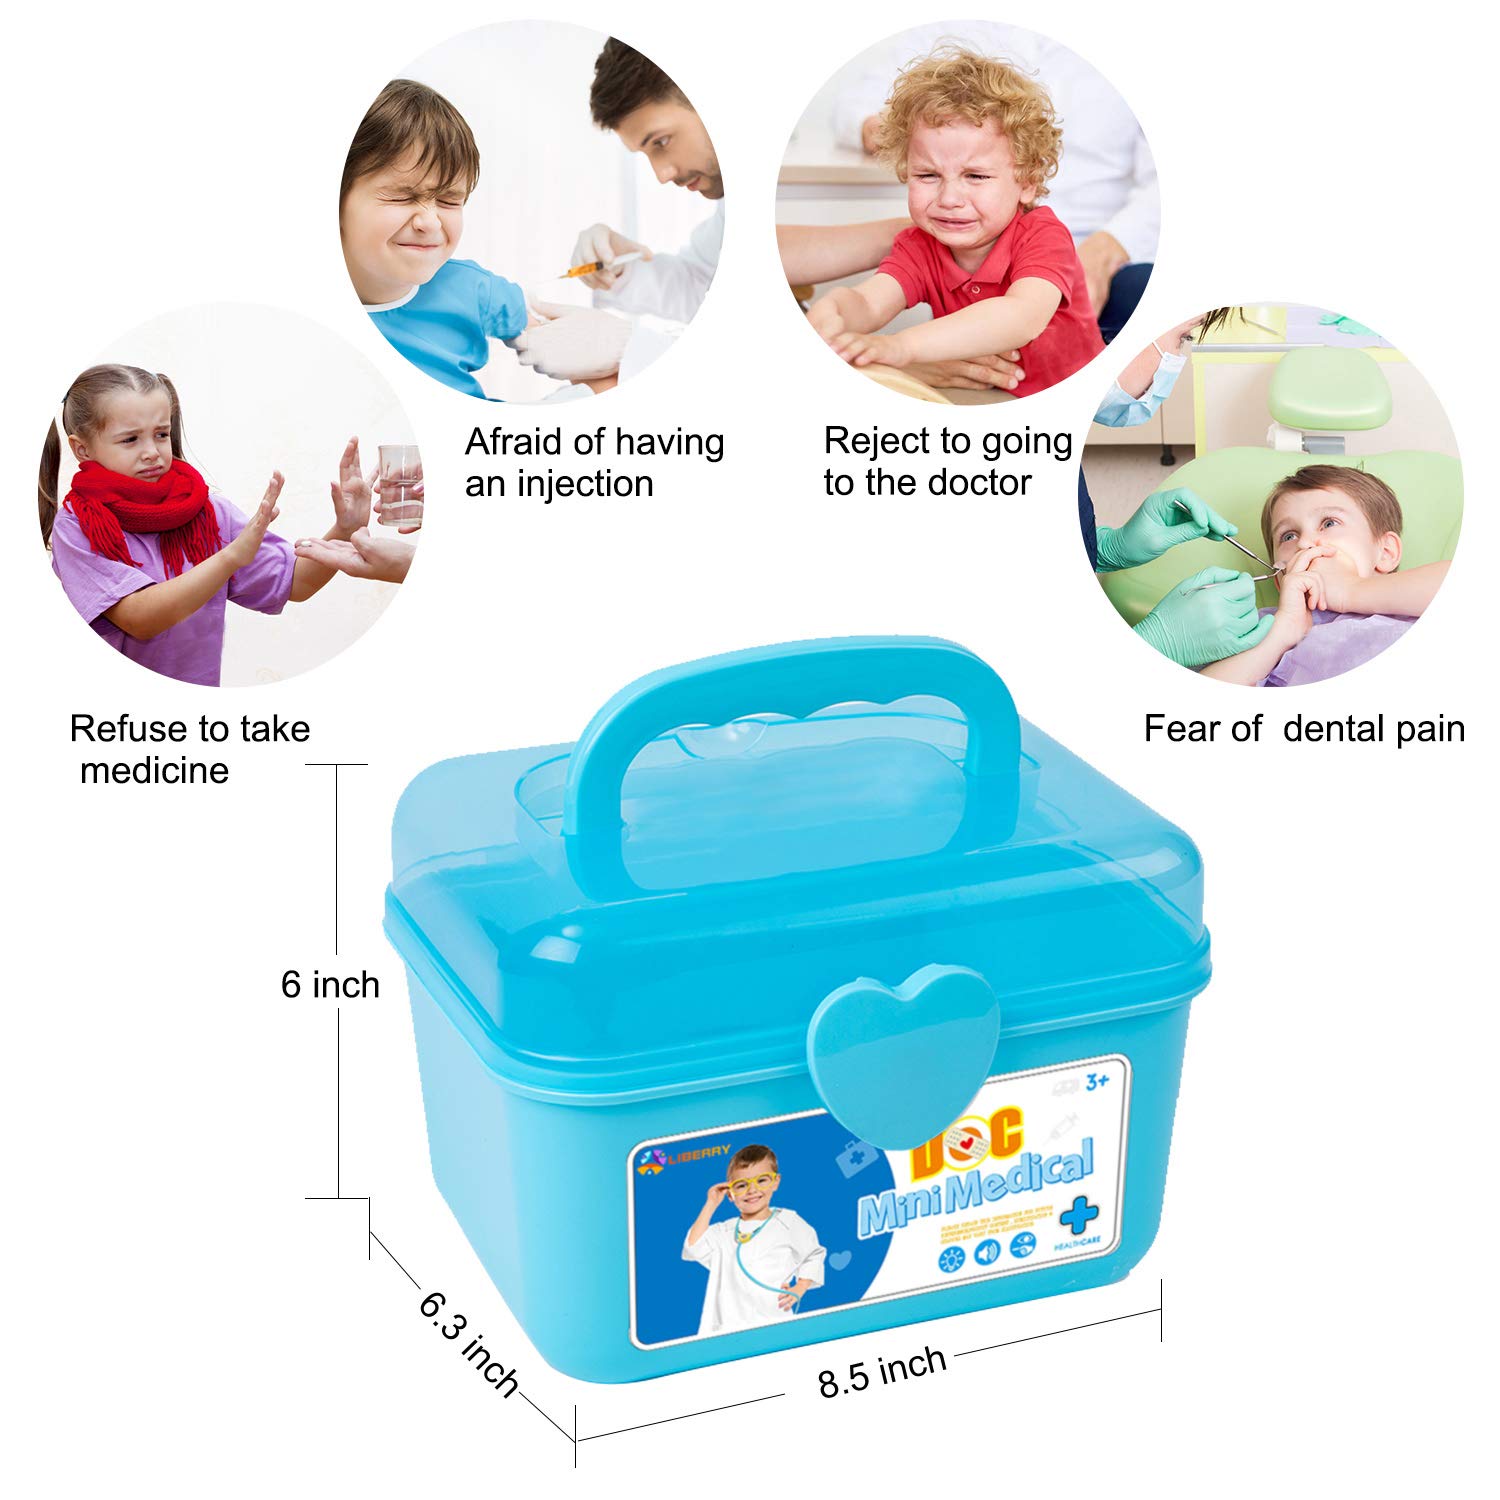 Durable Doctor Kit for Kids, 23 Pieces Pretend Play Educational Doctor Toys, Dentist Medical Kit with Stethoscope Doctor Role Play Costume, Doctor Set Toys for Toddler Boys Girls 3 4 5 6 7 8 Years Old